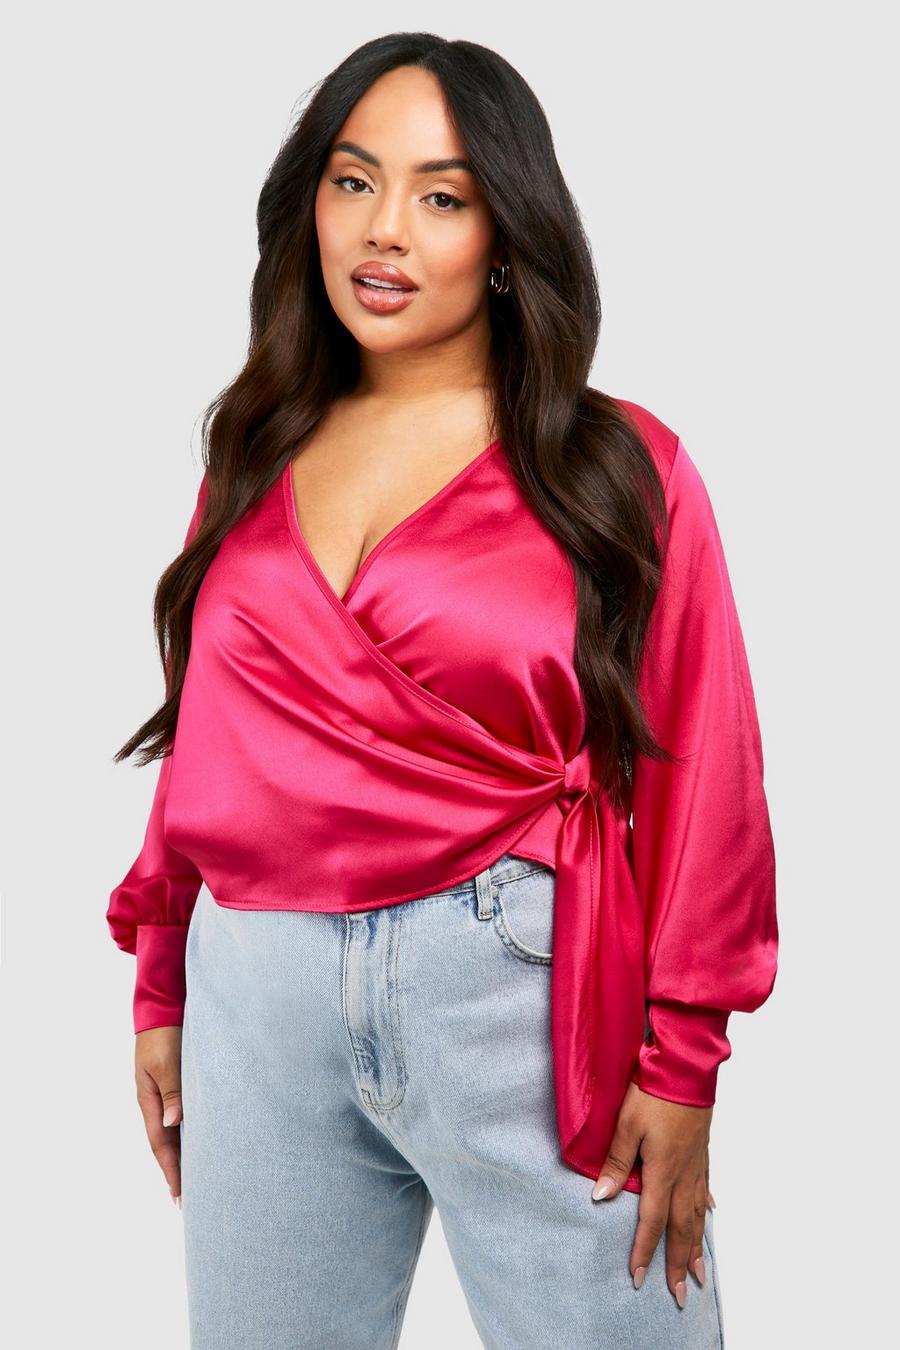 Plus Satin Wickelbluse, Hot pink